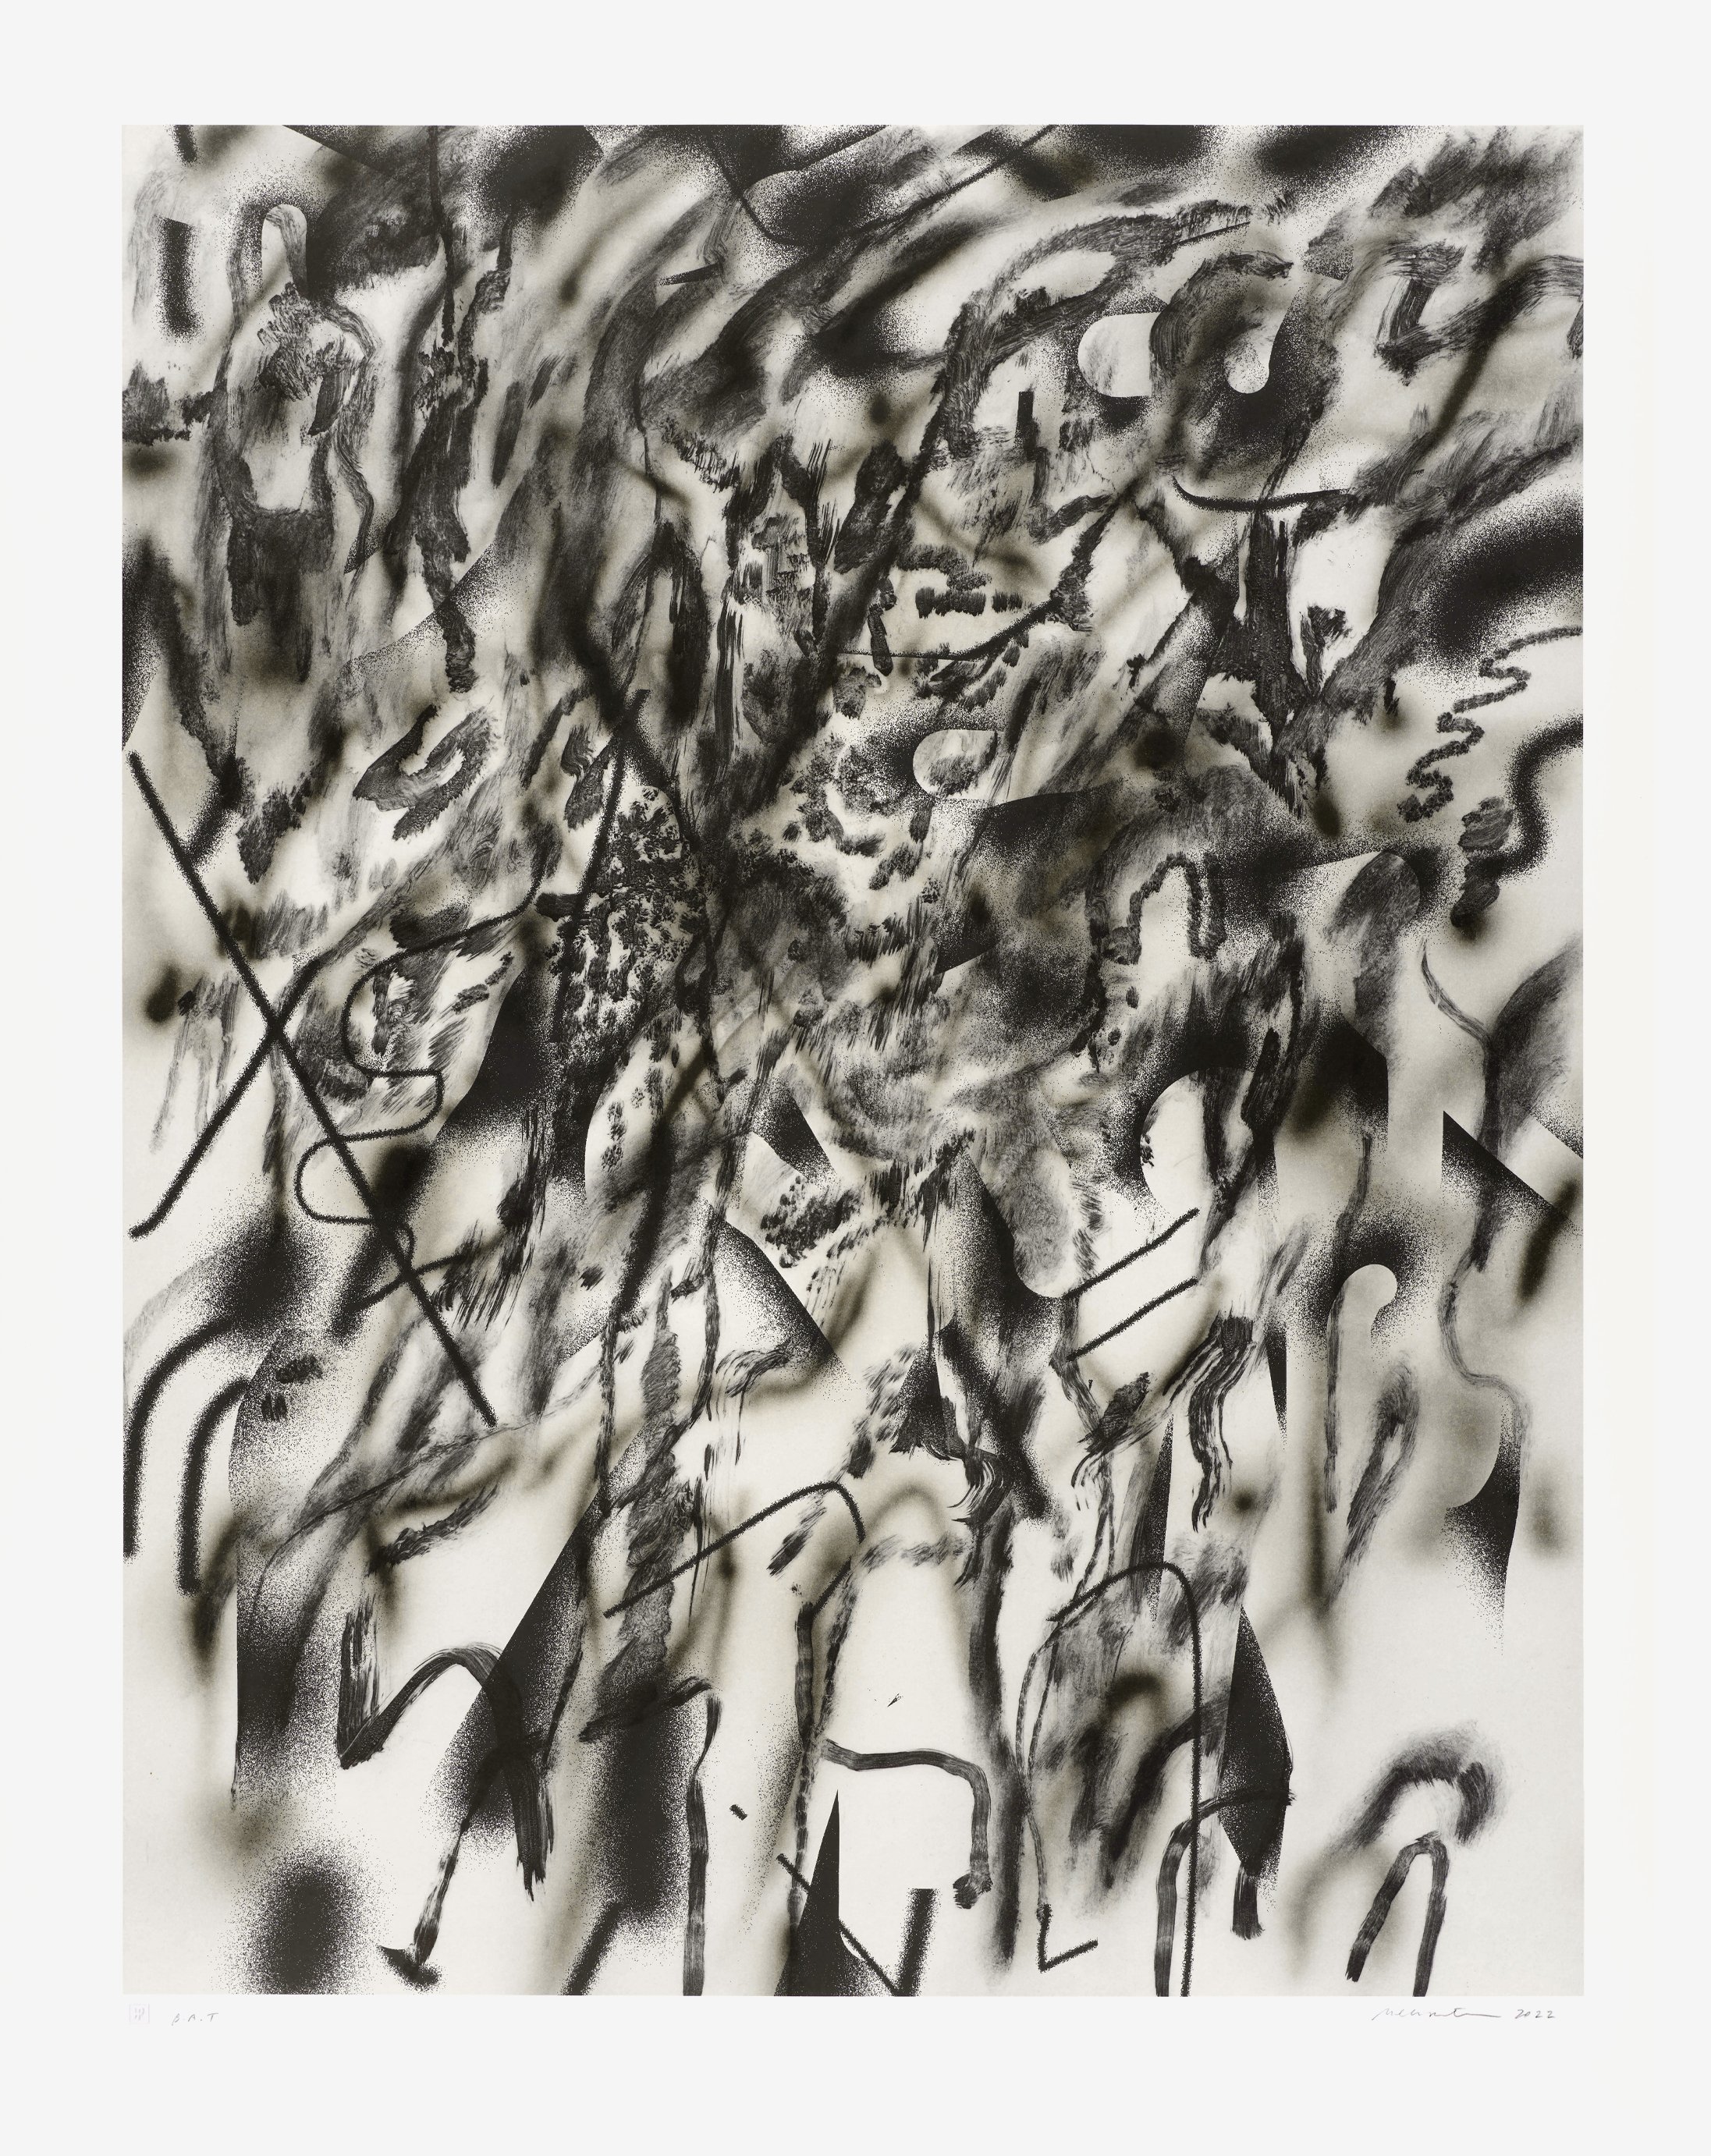    Corner of Lake and Minnehaha (smoke)  , Julie Mehretu, 2022  Edition of 45 | Lithograph with chine collé on Somerset Satin | 47" x 37" image size | 54&nbsp;¾" x 43 ½" paper size  $30,000 